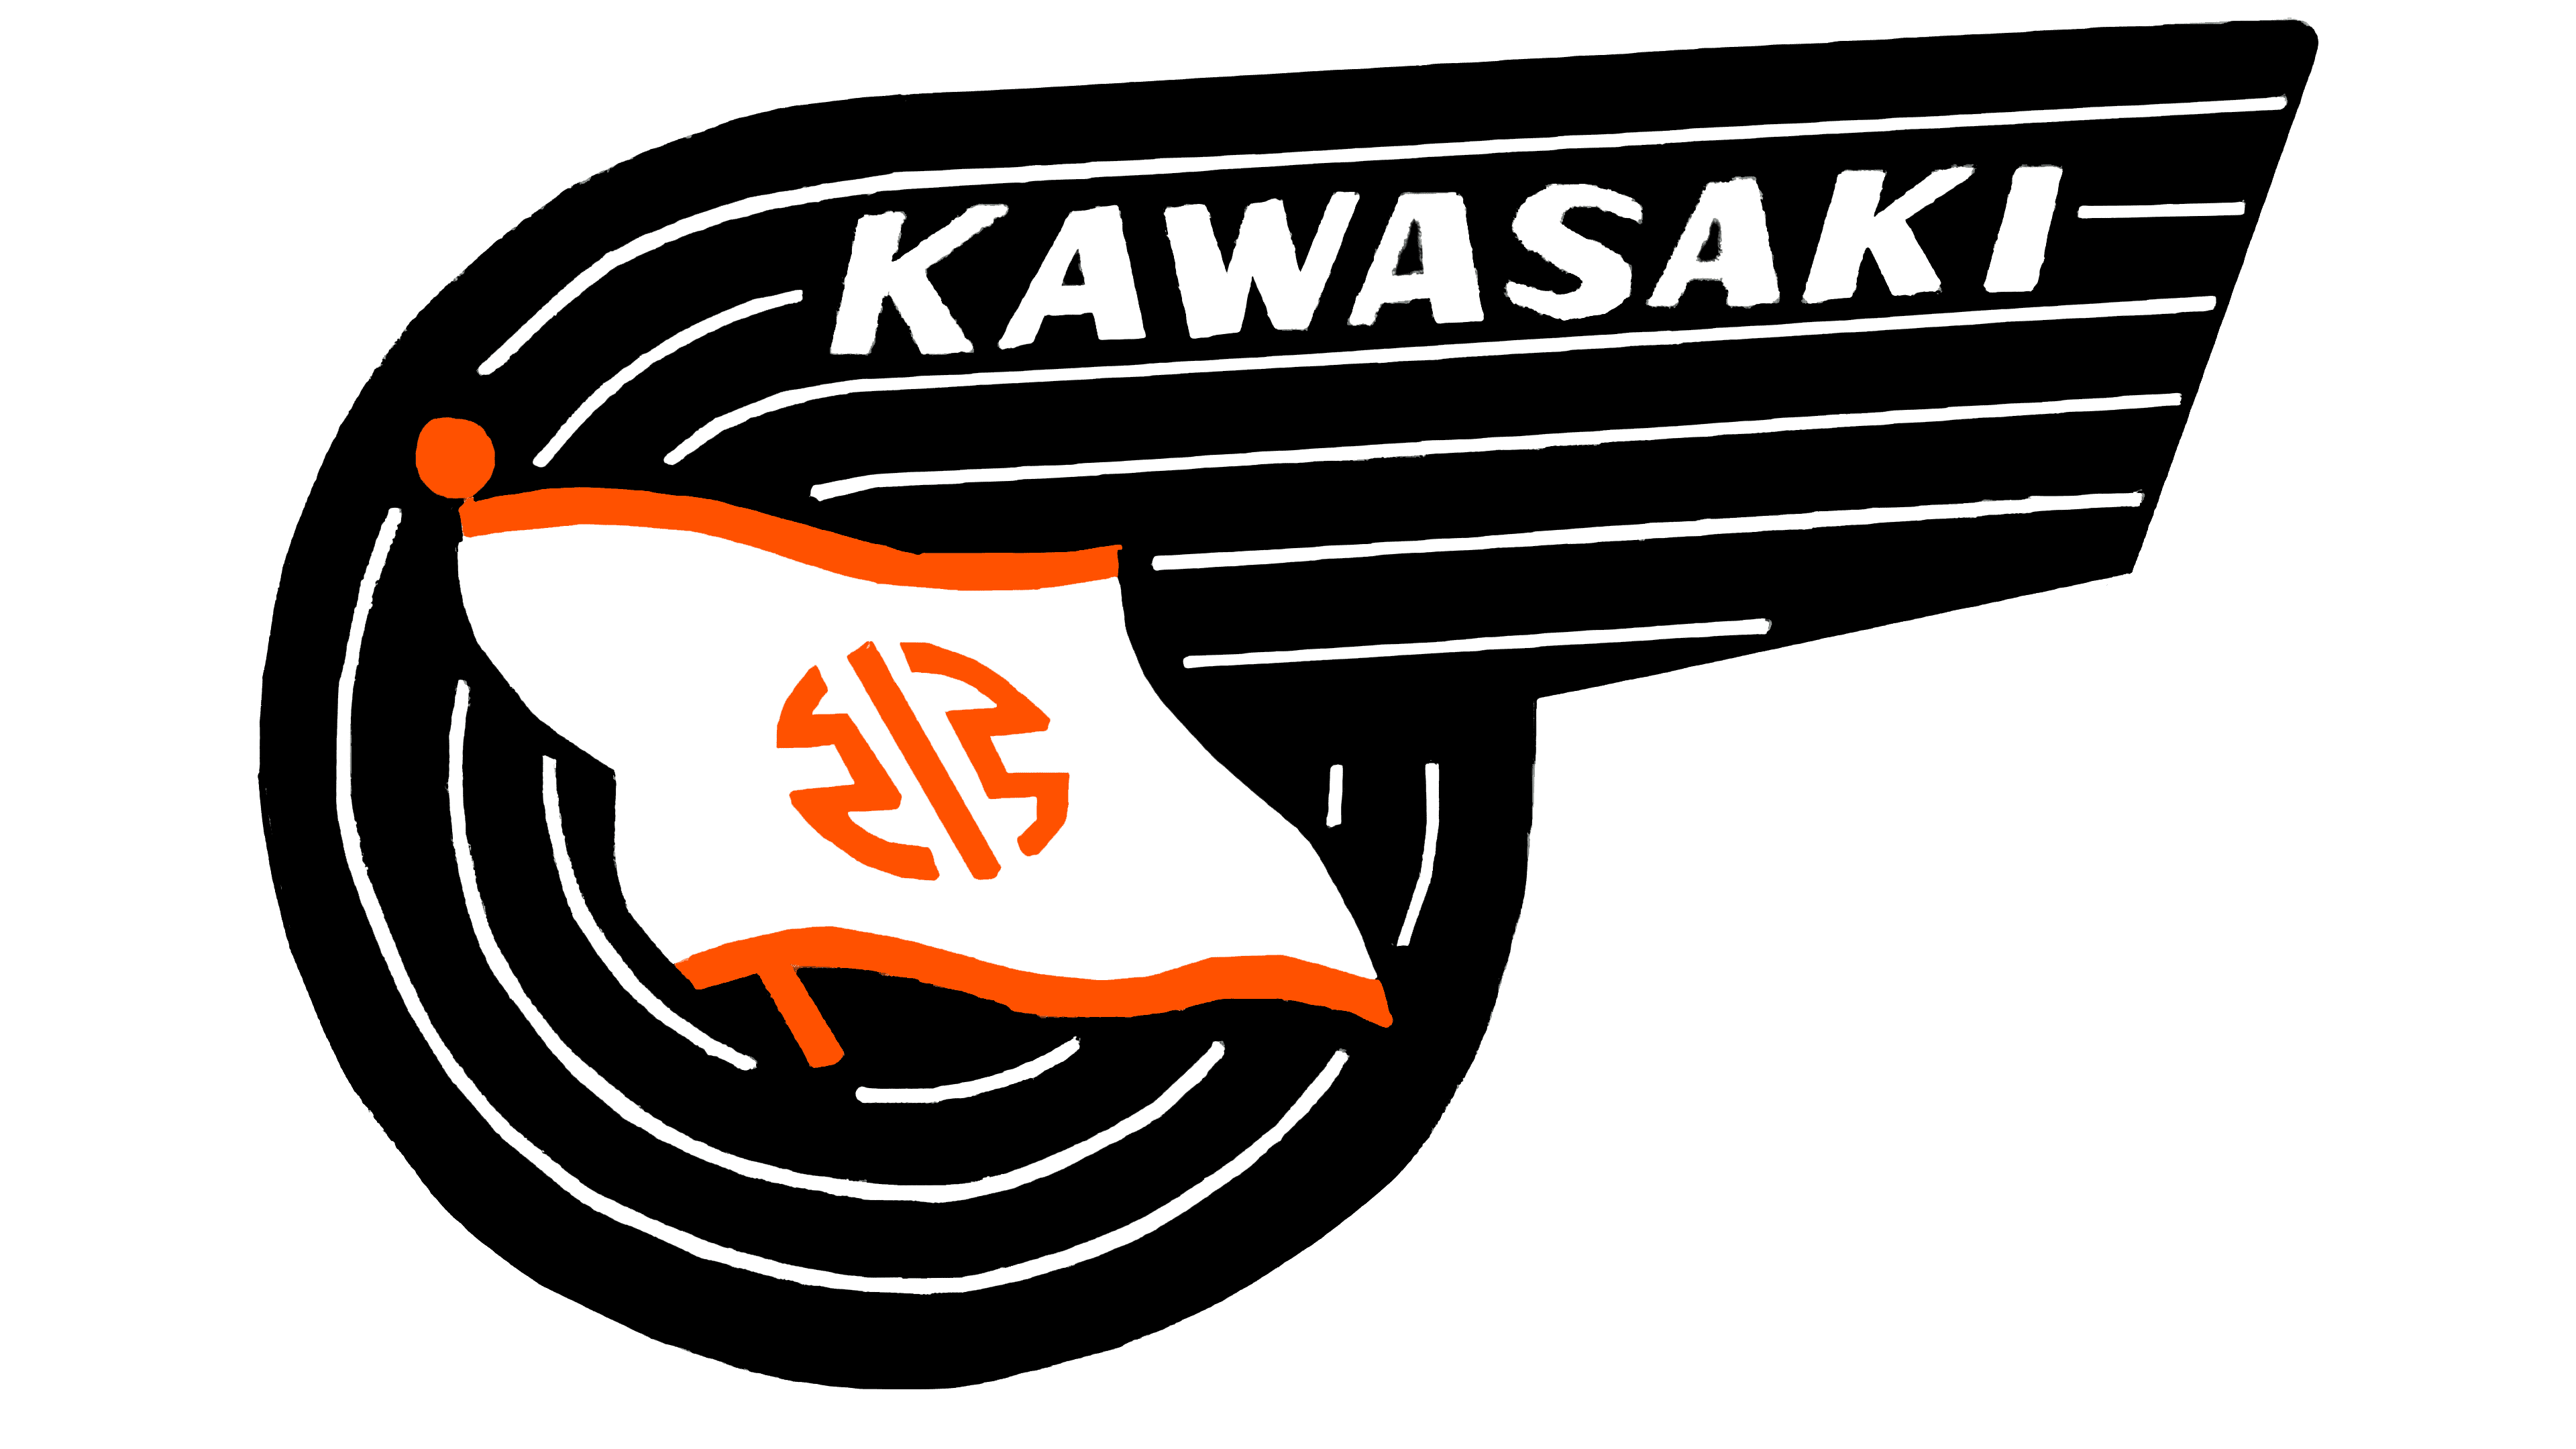 kawasaki logo history the most famous brands and company logos in the world kawasaki logo history the most famous